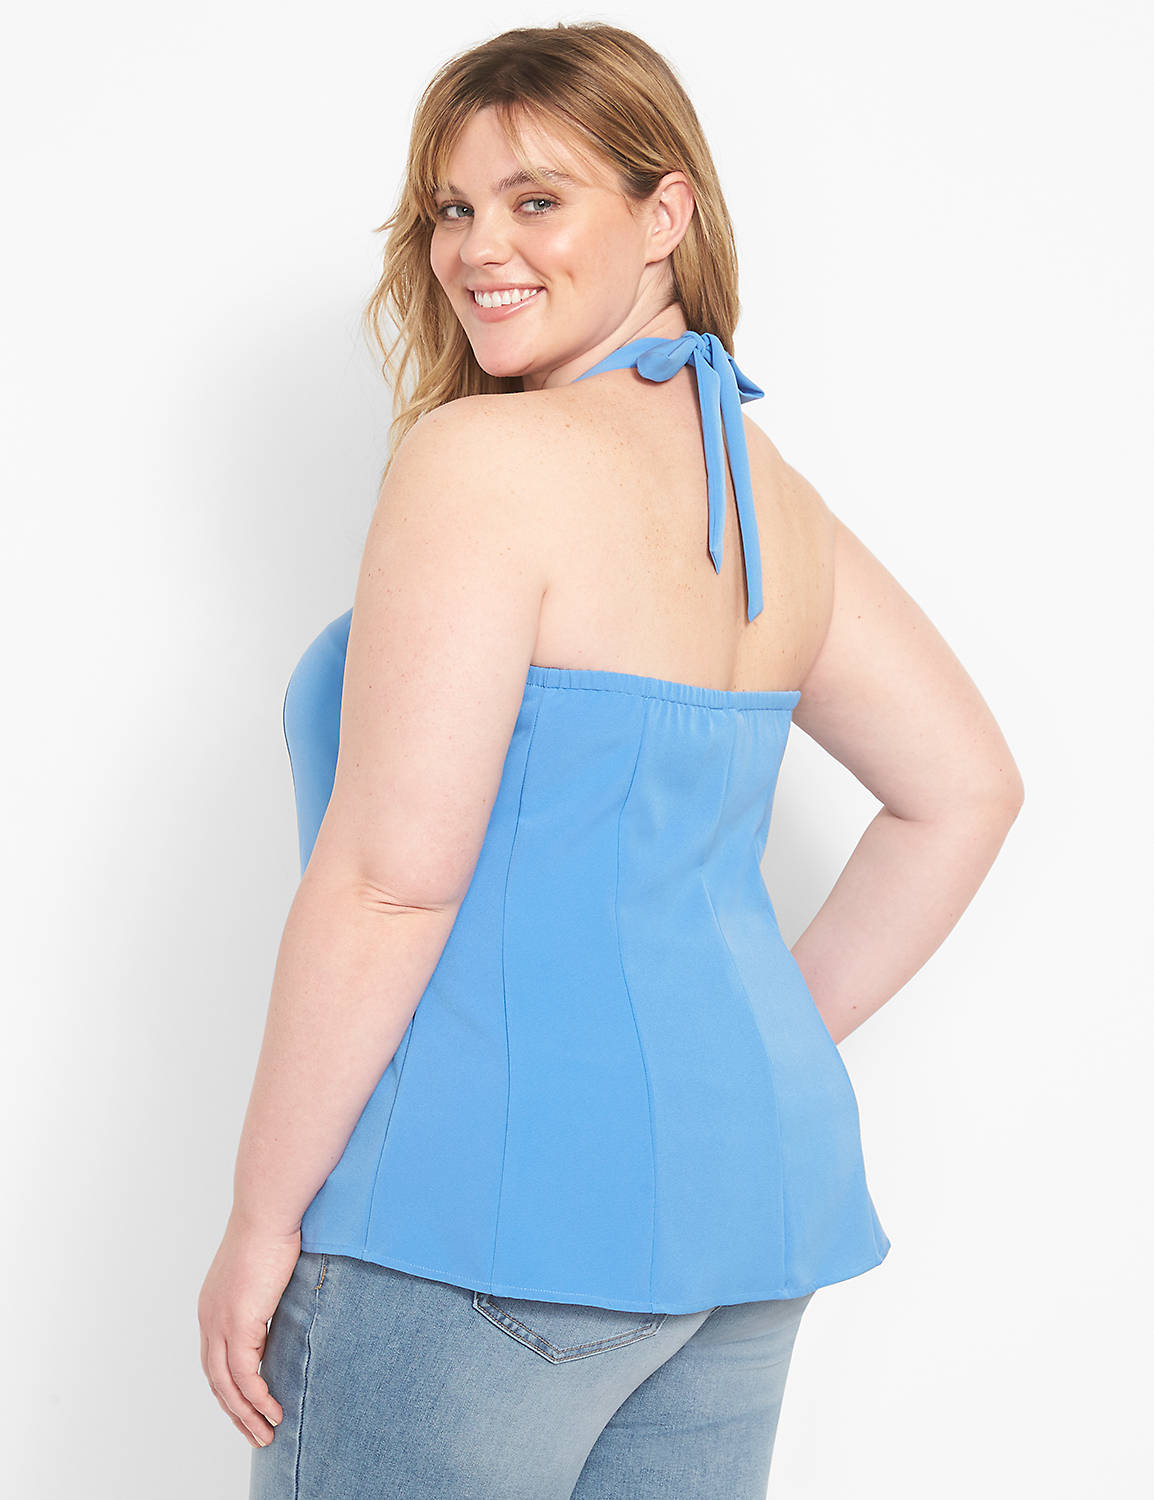 Sleeveless Halter Neck Fitted Bodic Product Image 2